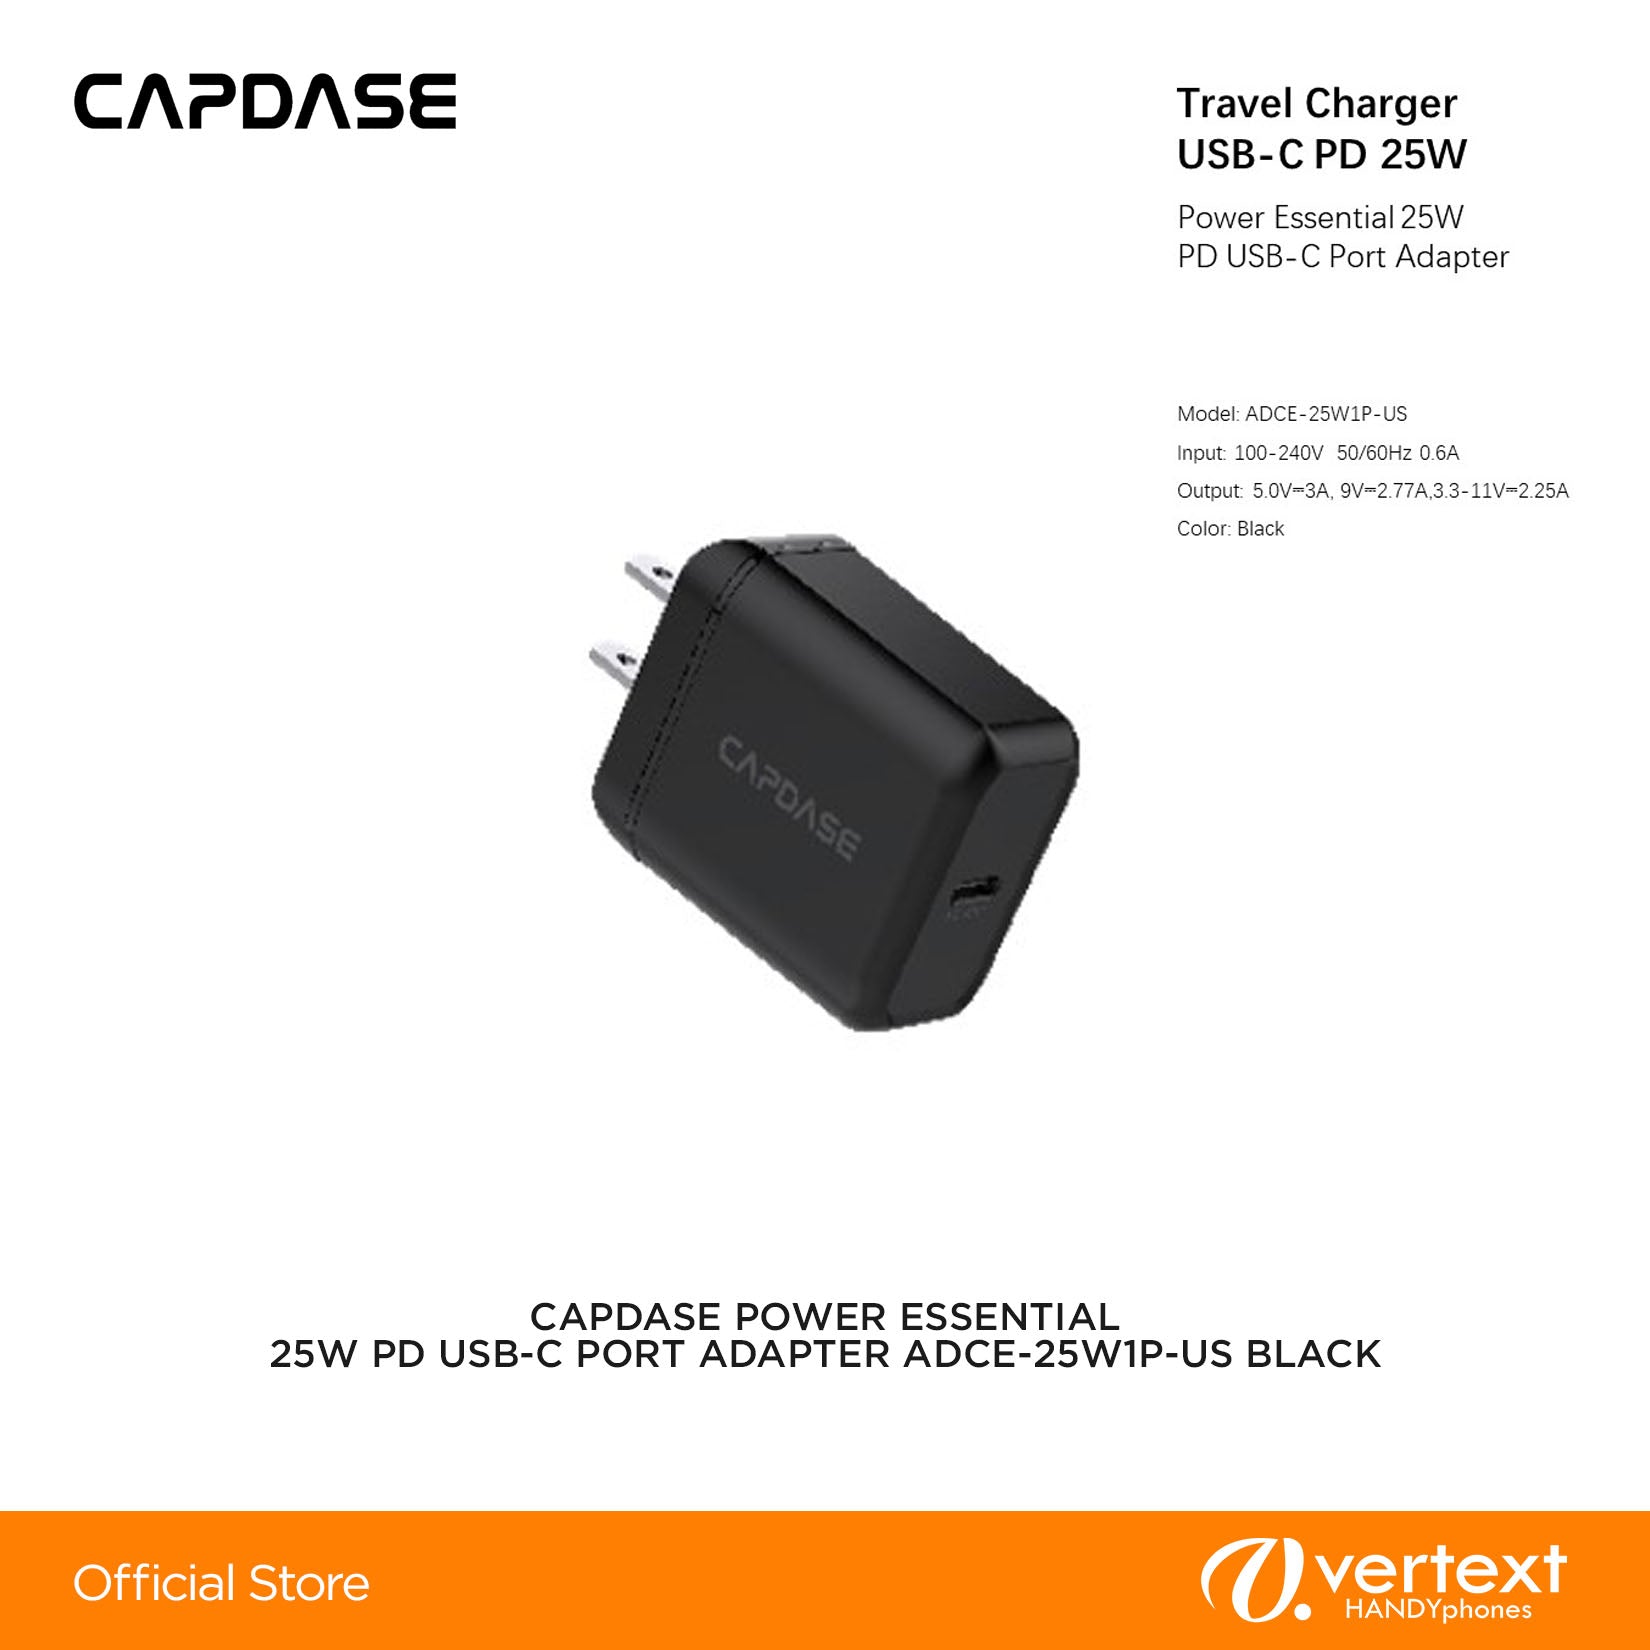 Capdase POWER ESSENTIAL 25W PD USB-C PORT ADAPTER ADCE-25W1P-US